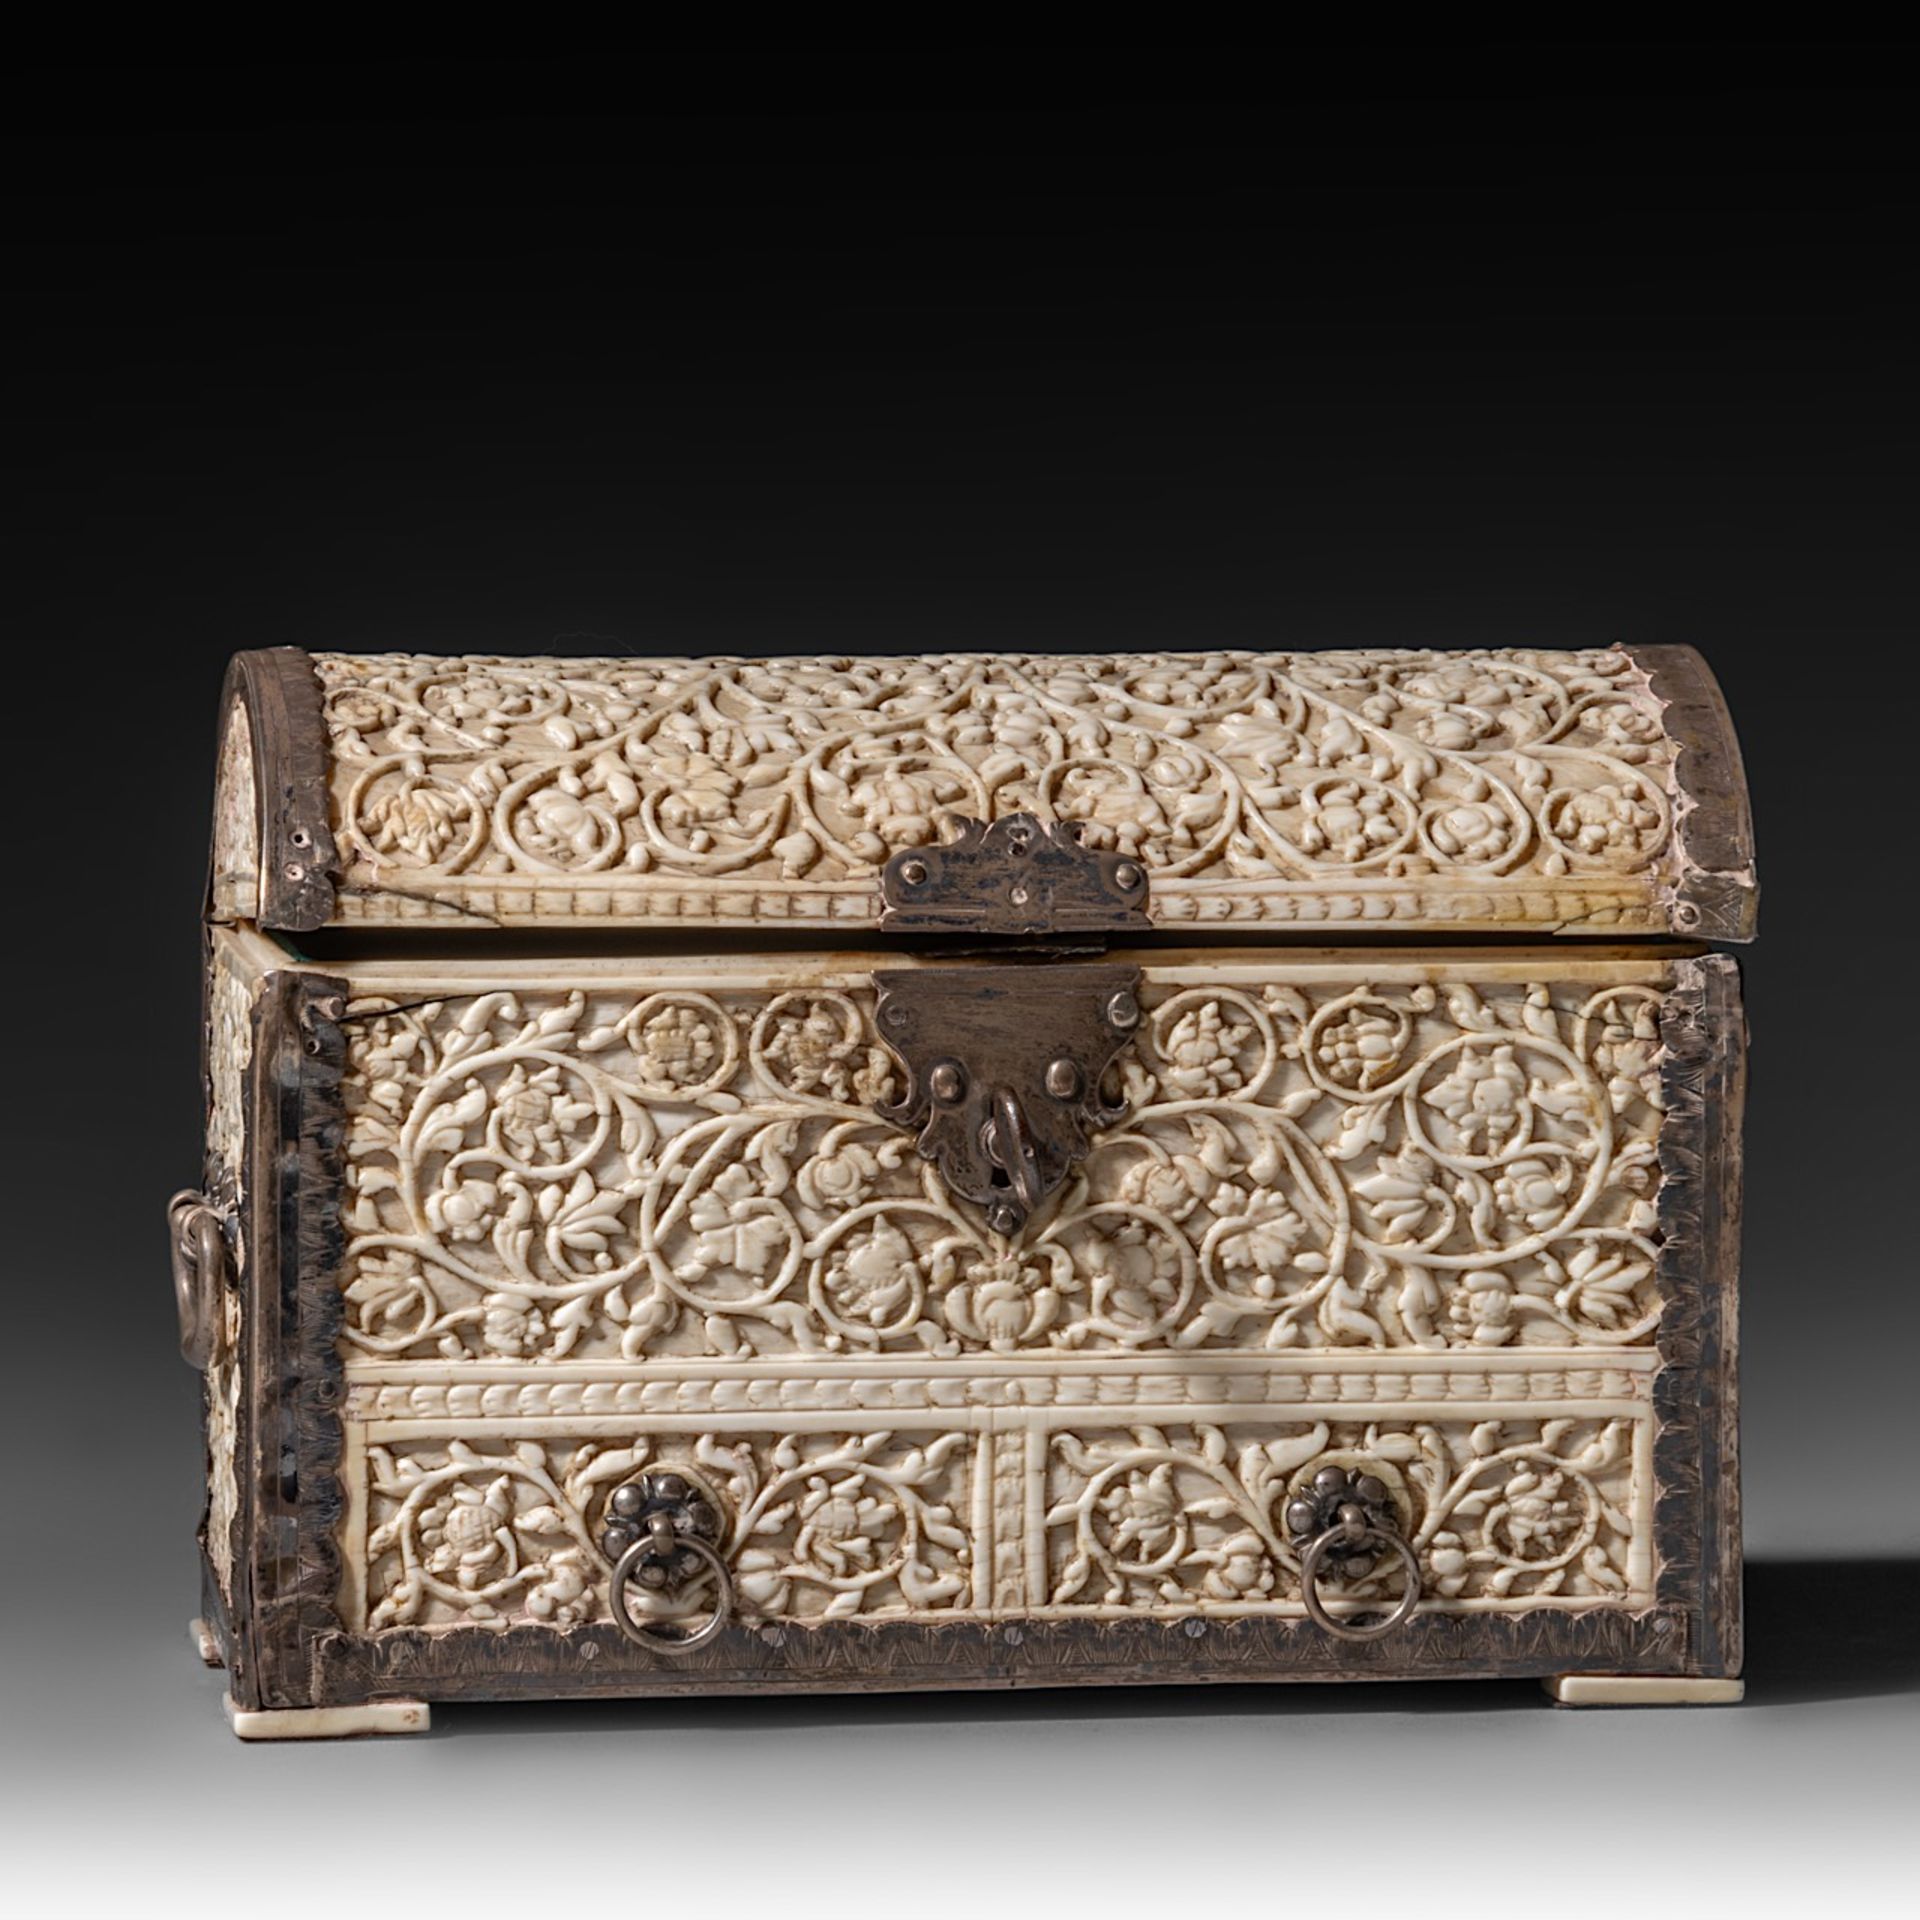 A 17th/18th-century Sinhalese (Sri Lanka) ivory jewelry casket, H 13,5 - W 19,3 - D 10,1 cm / total - Image 3 of 11